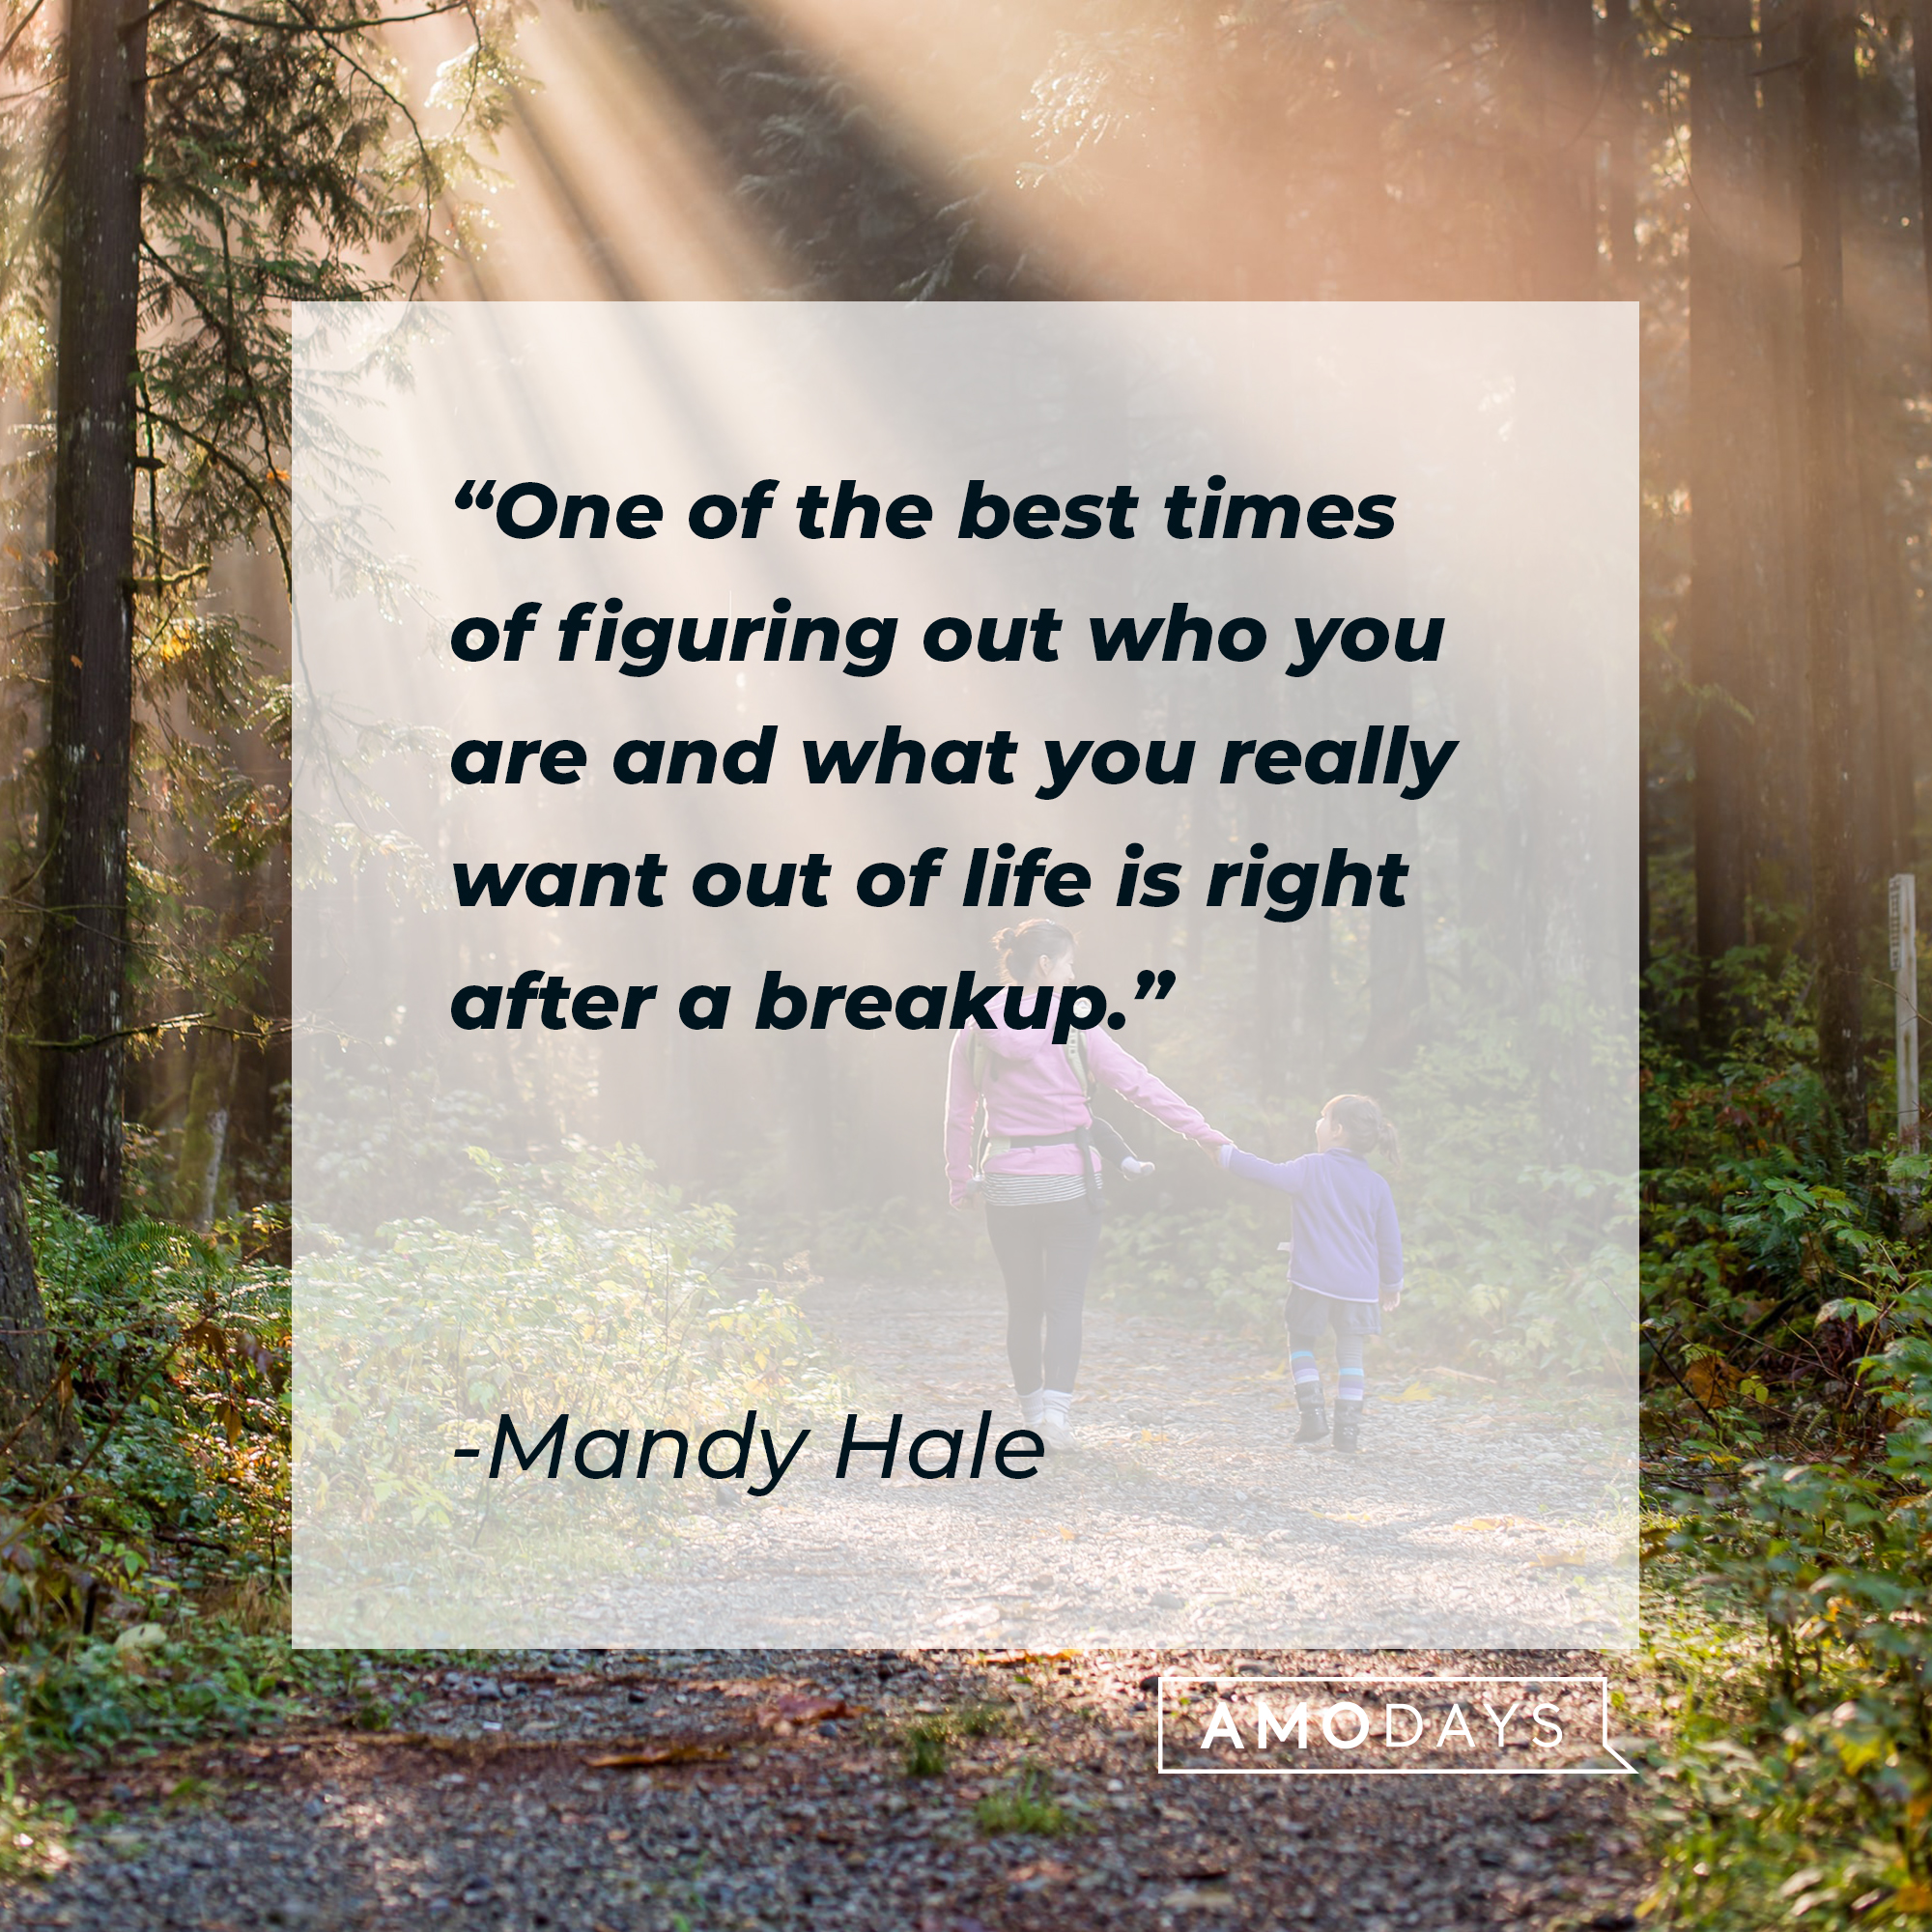 Mandy Hale's quote: "One of the best times of figuring out who you are and what you really want out of life is right after a breakup." | Image: Unsplash.com